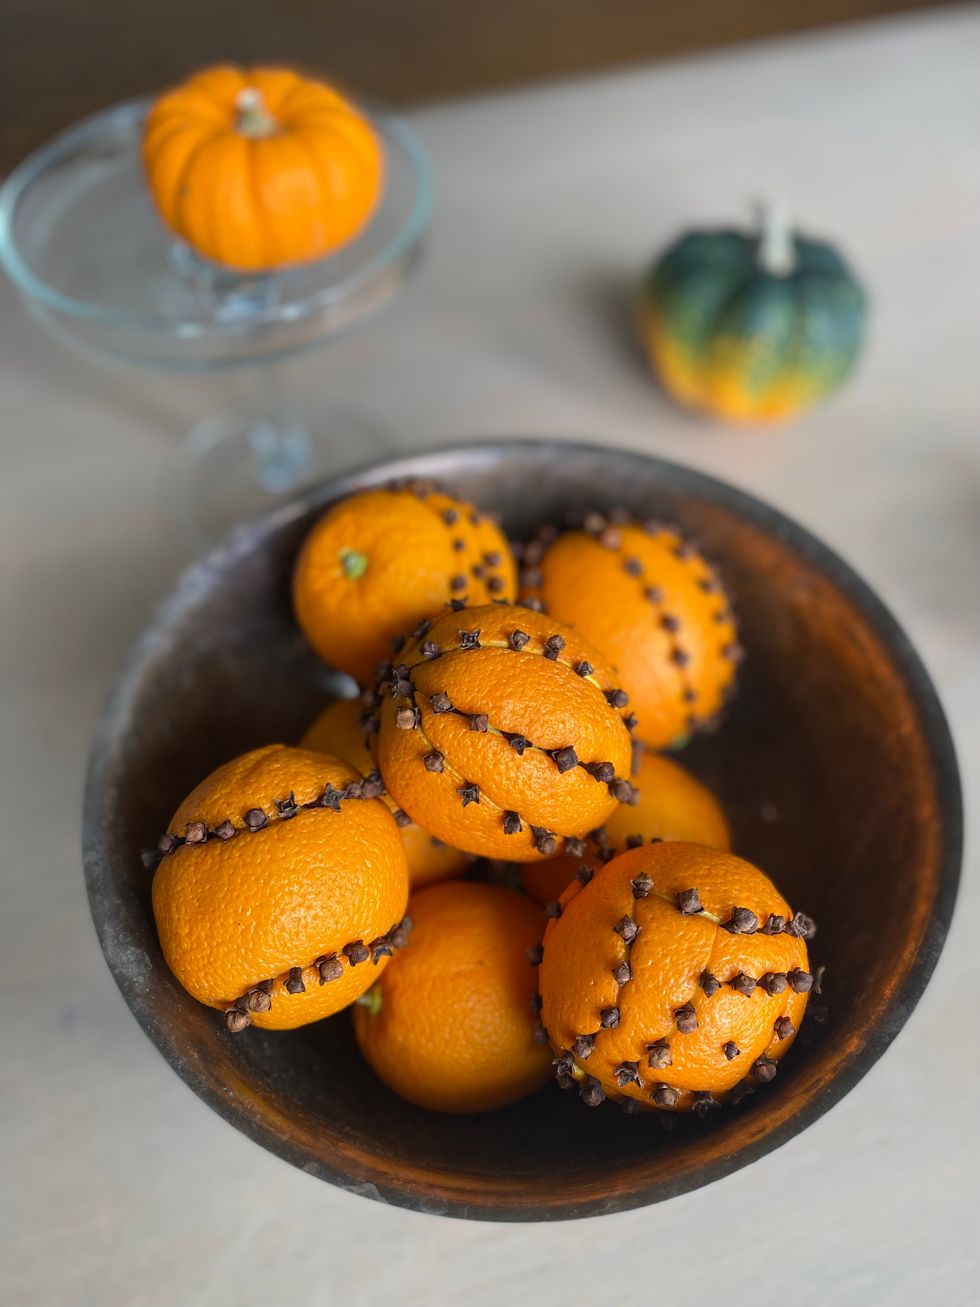 Orange You Glad You Didn’t Throw Out Your Citrus?